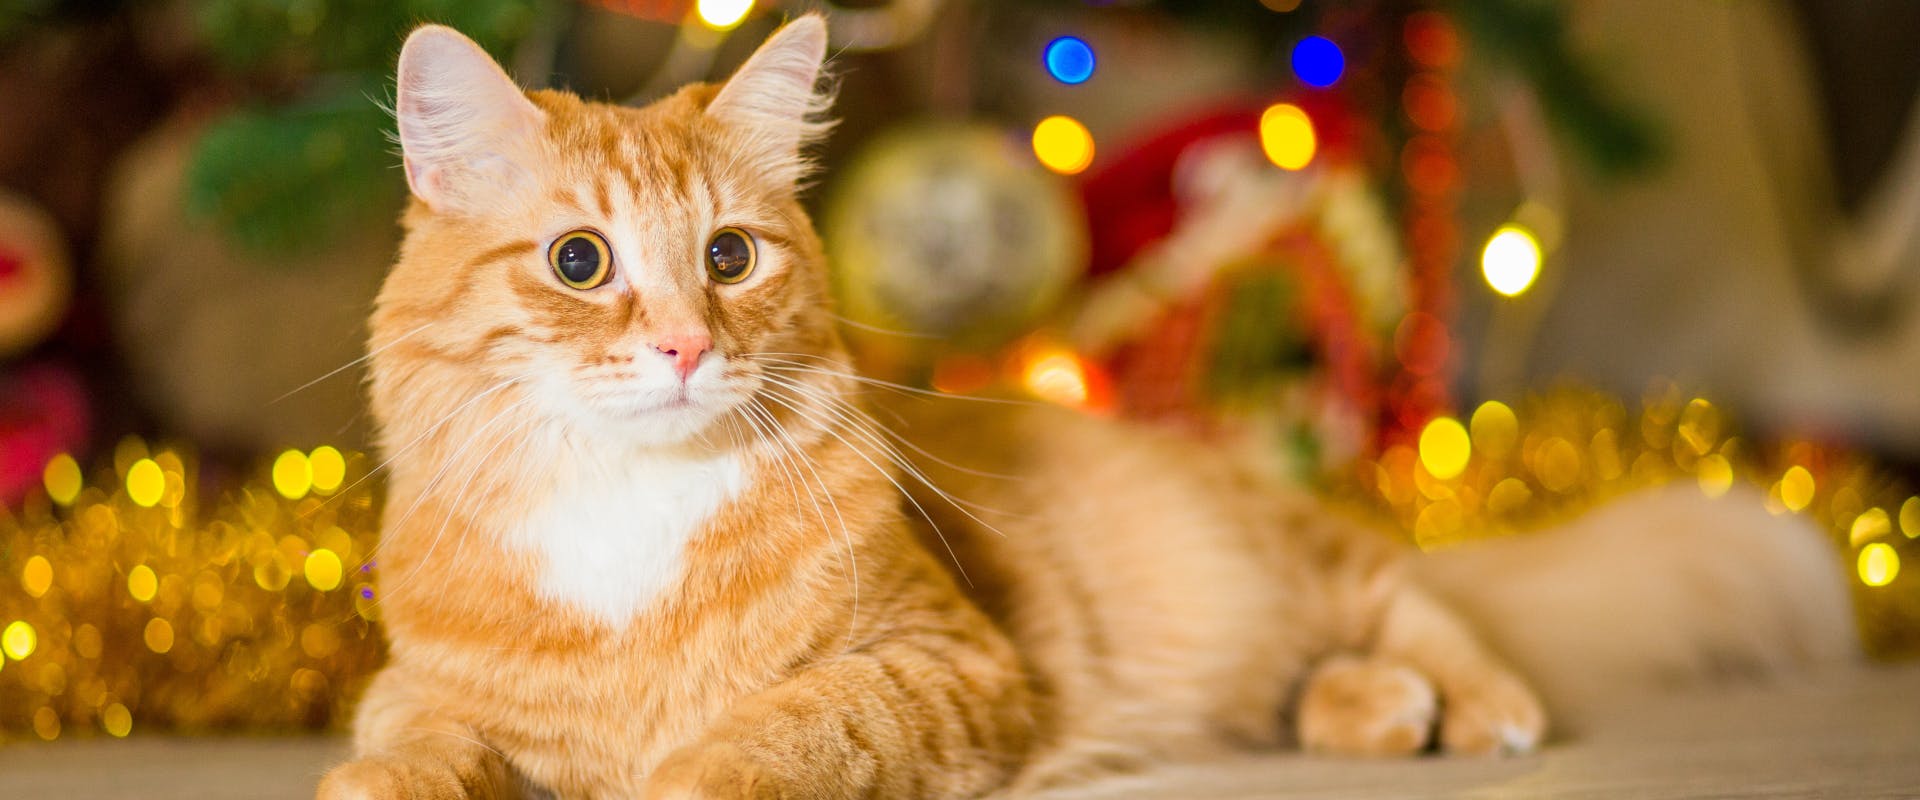 a ginger cat sat amongst festive decorations with dilated pupils